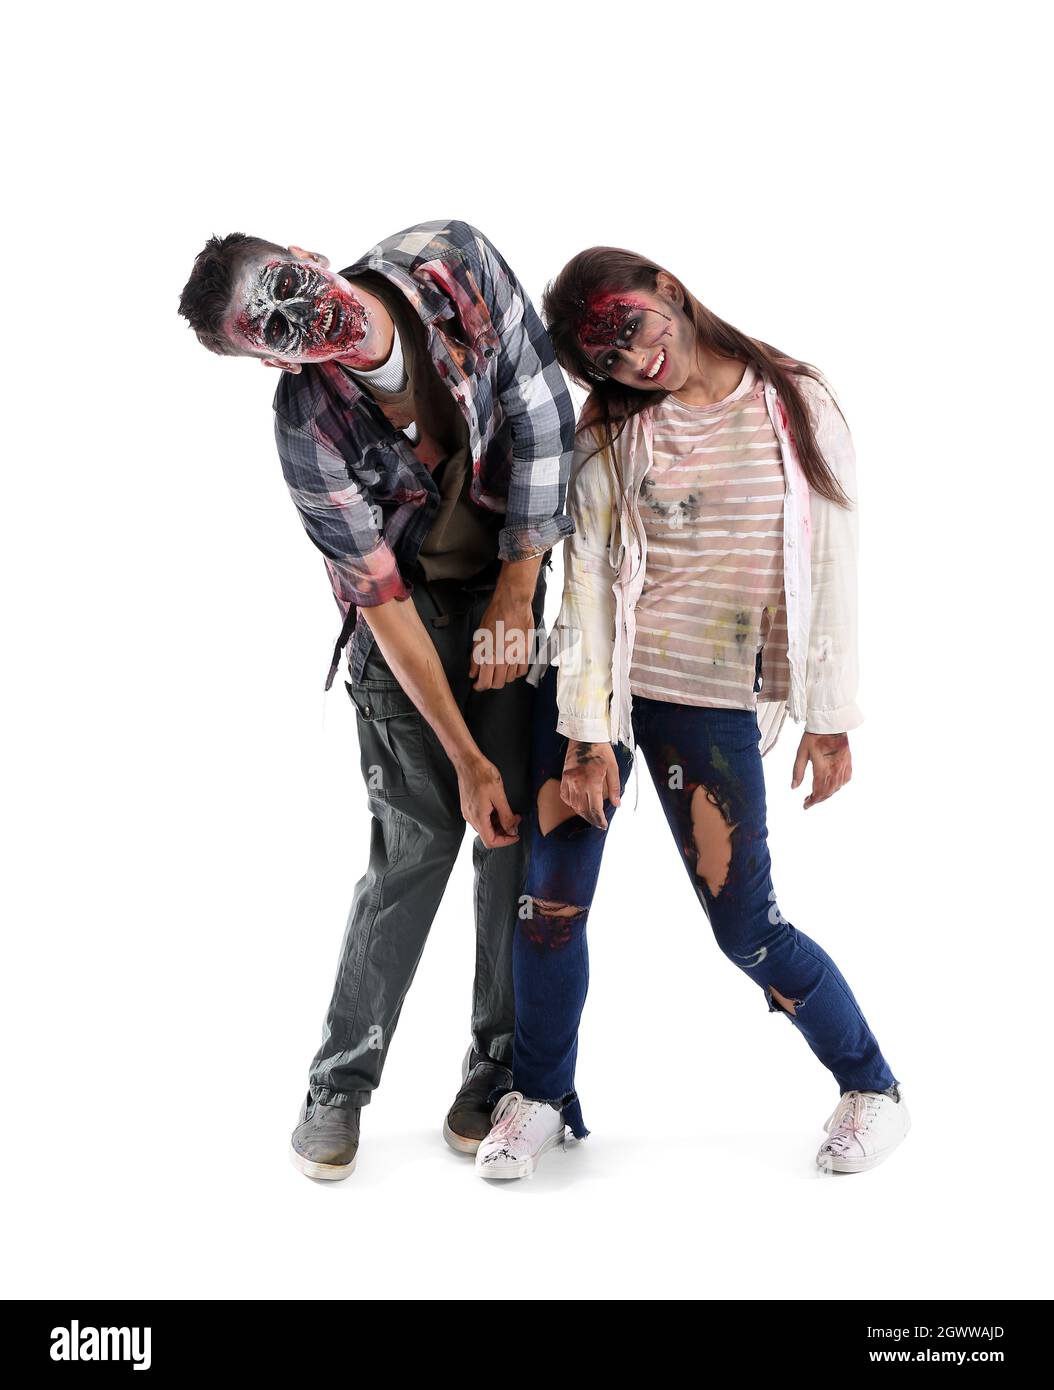 Torn and Bloody Jeans stock photo. Image of hurt, zombie - 42035152